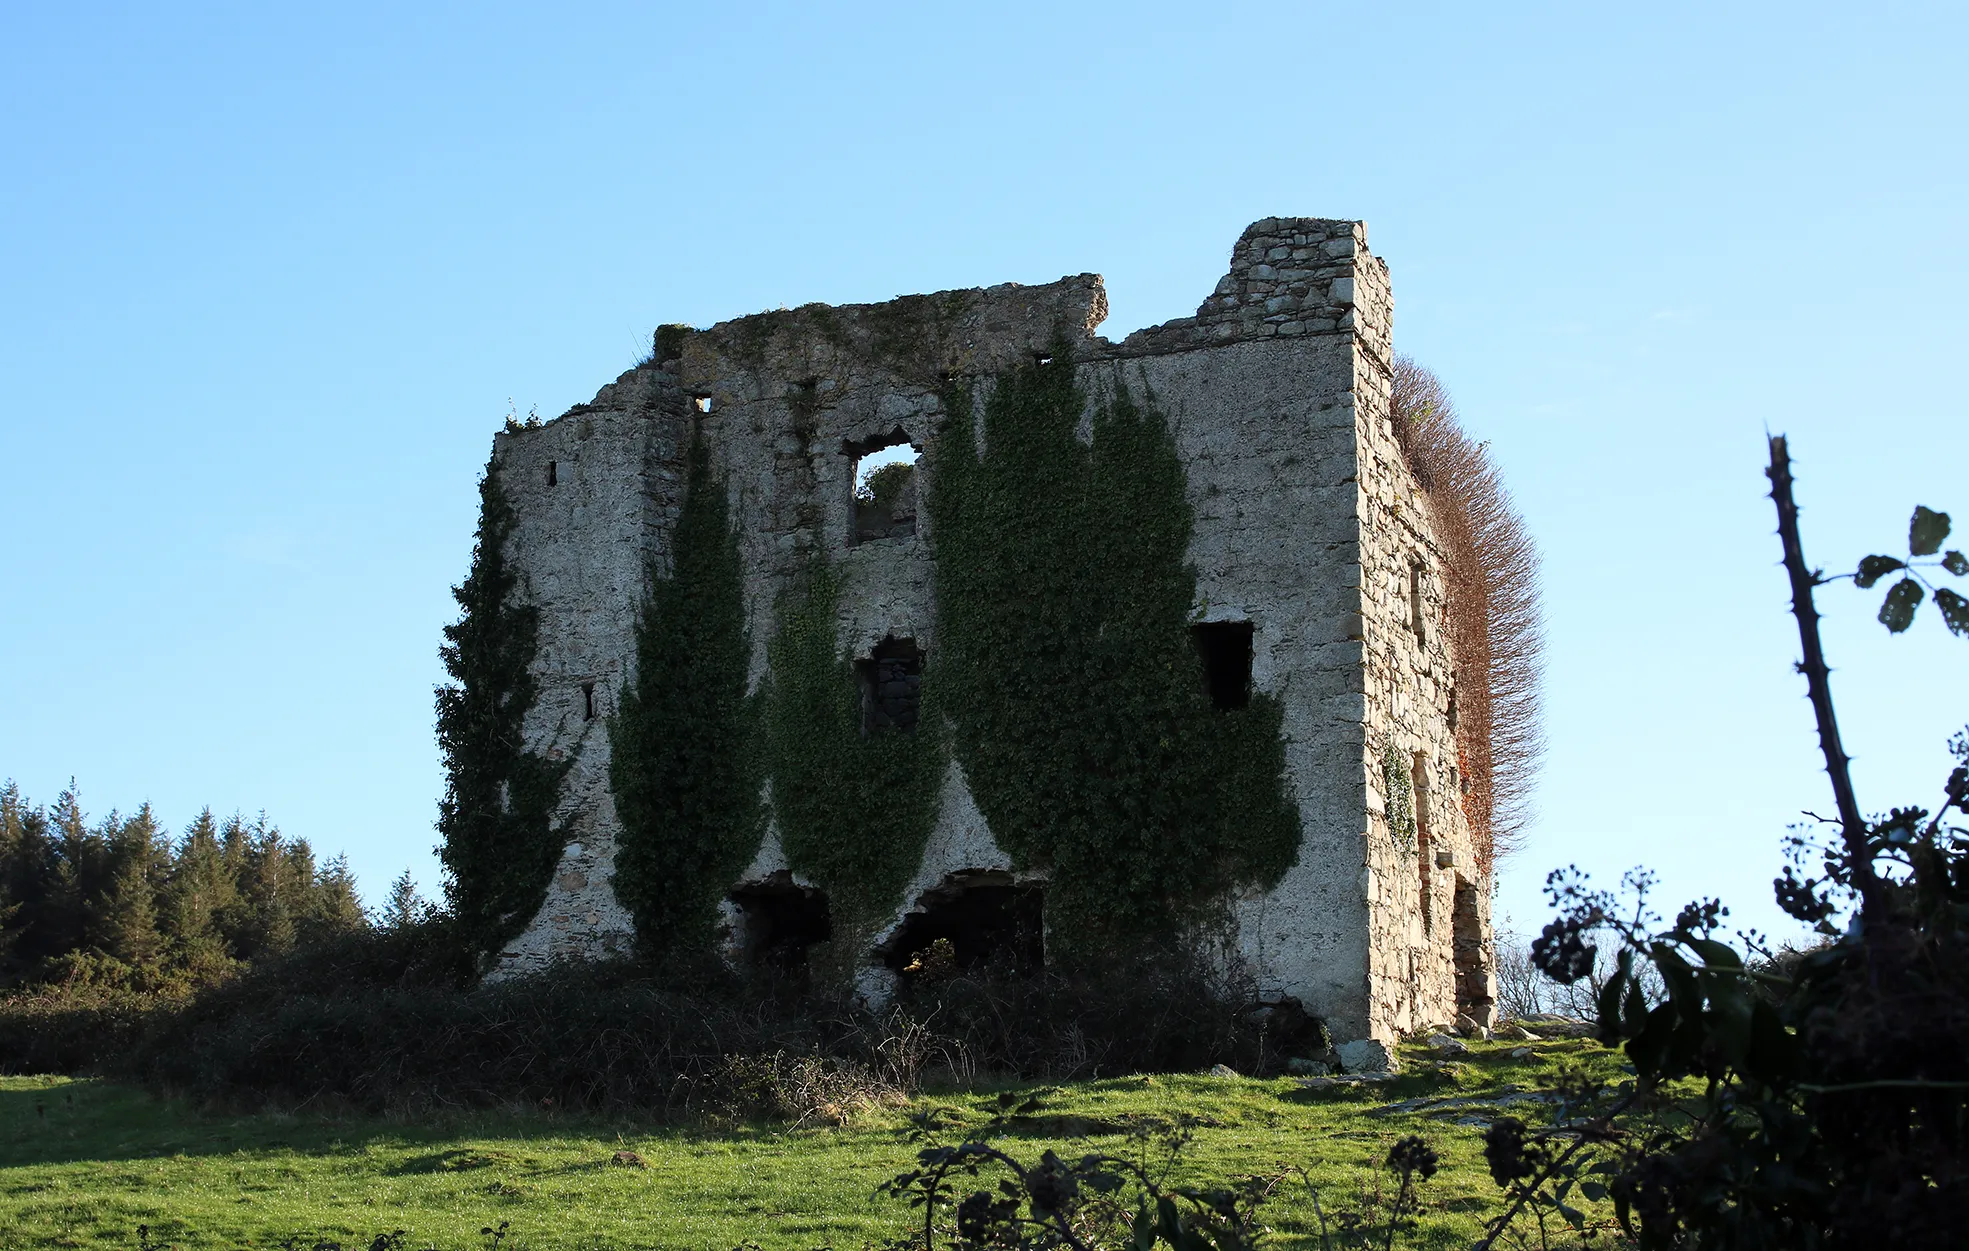 Photo showing: Puck's Castle, Puck's Castle Lane in February 2019. A History of the County Dublin suggests that the fortified dwelling was erected around 1537 by Peter Talbot to defend the lands from incursions by the O'Toole clan.  James II visited the castle following the Battle of the Boyne in 1690 while his army was camped at nearby Lehaunstown.